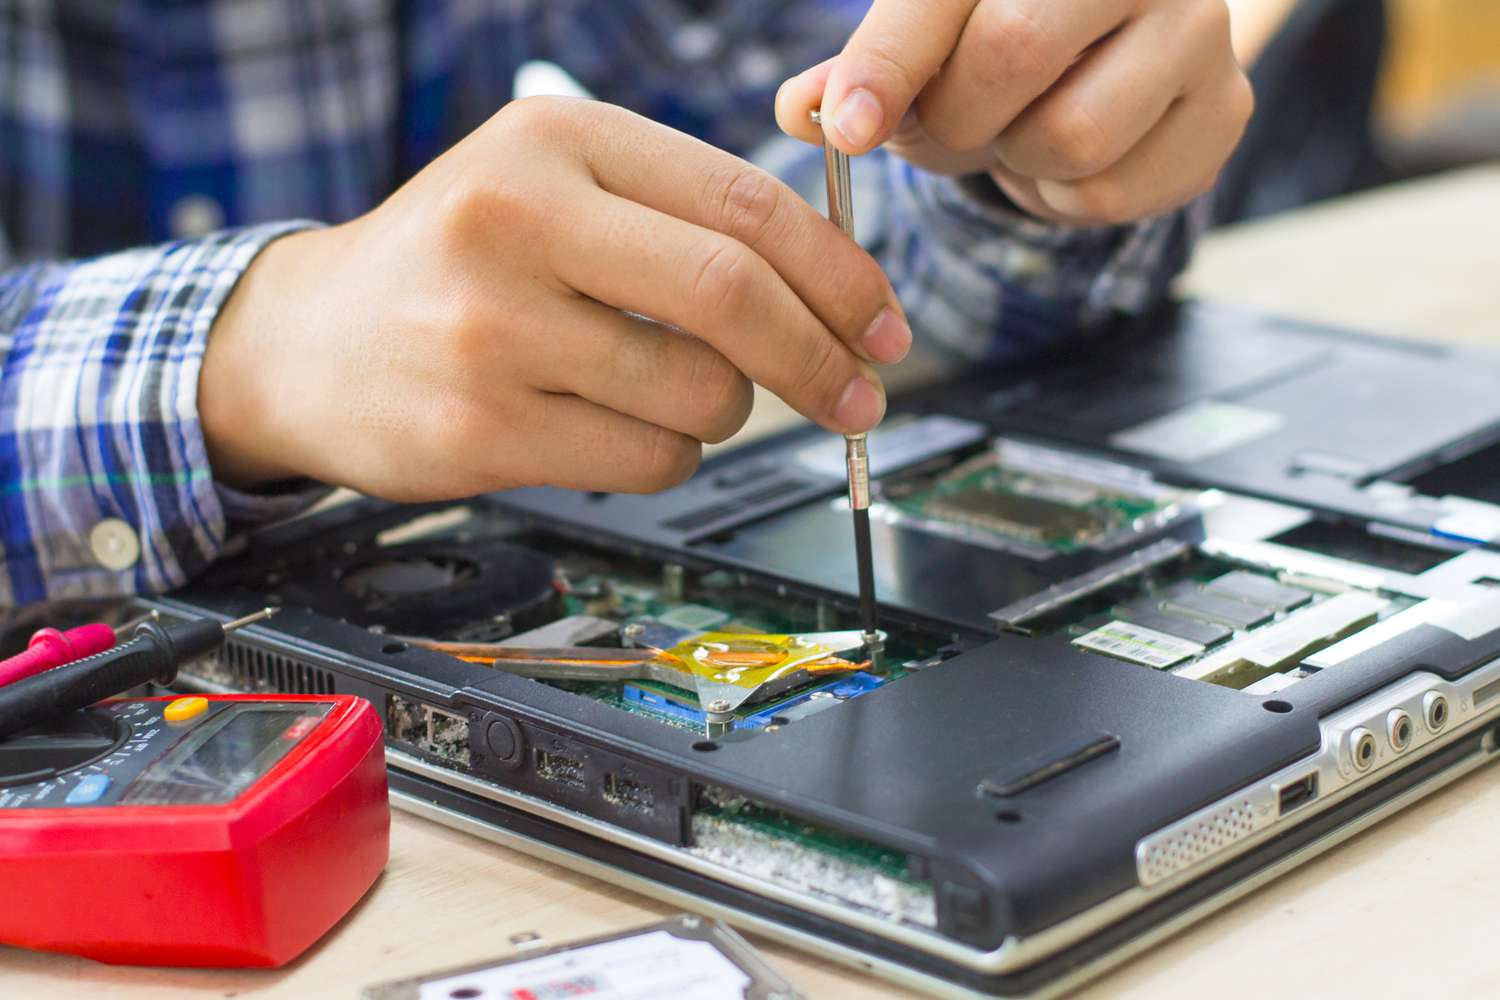 Computer Service and Repair Business For Sale in Connecticut